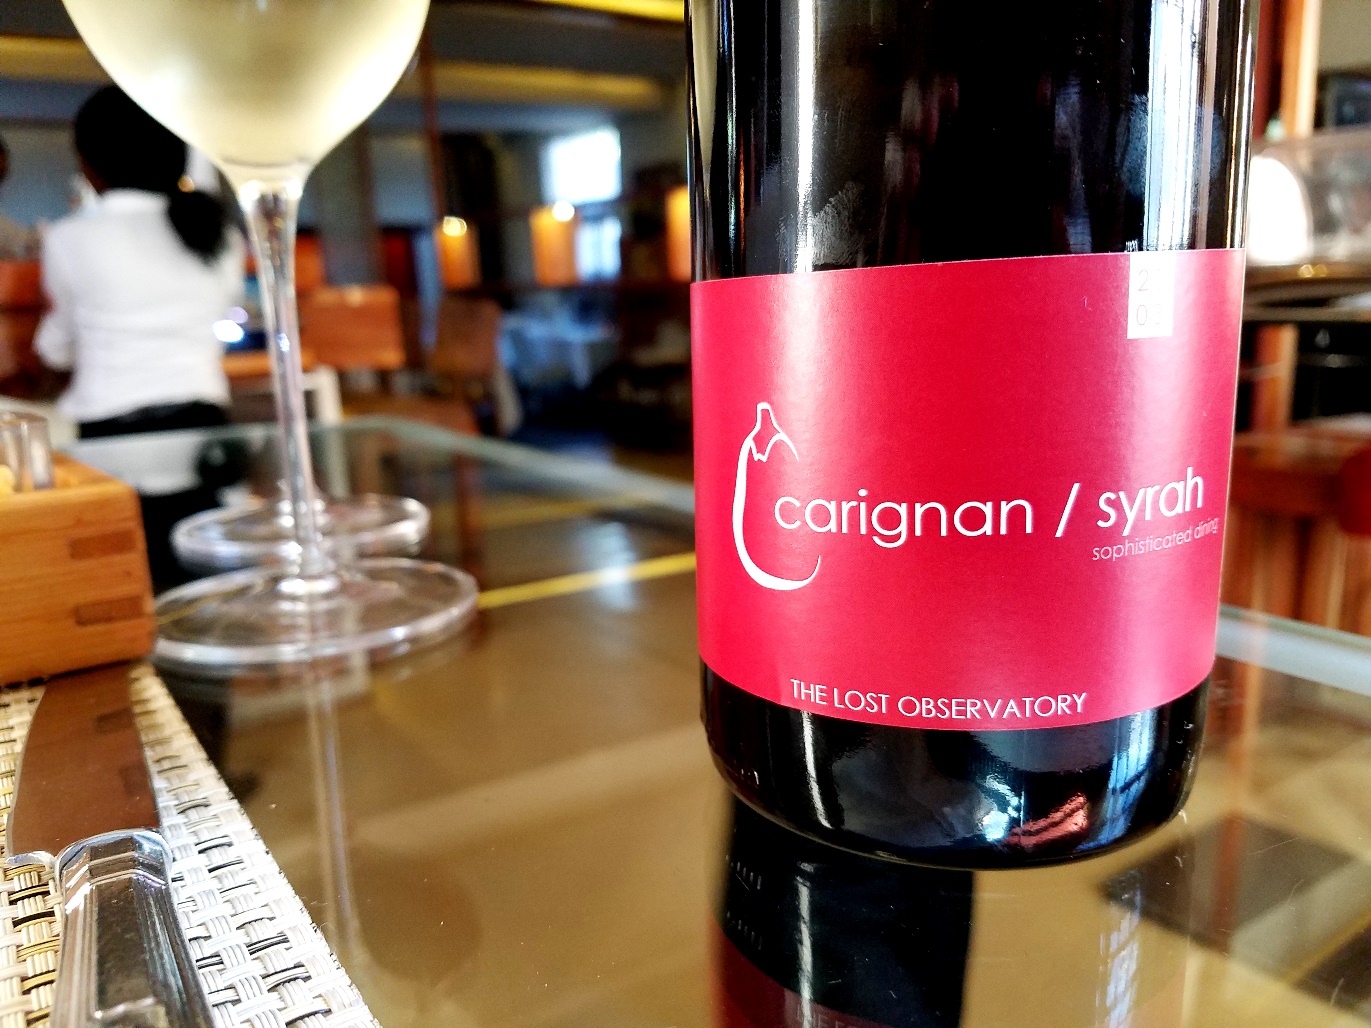 Aubergine, The Lost Observatory Carignan Syrah 2003, Swartland, South Africa, Wine Casual